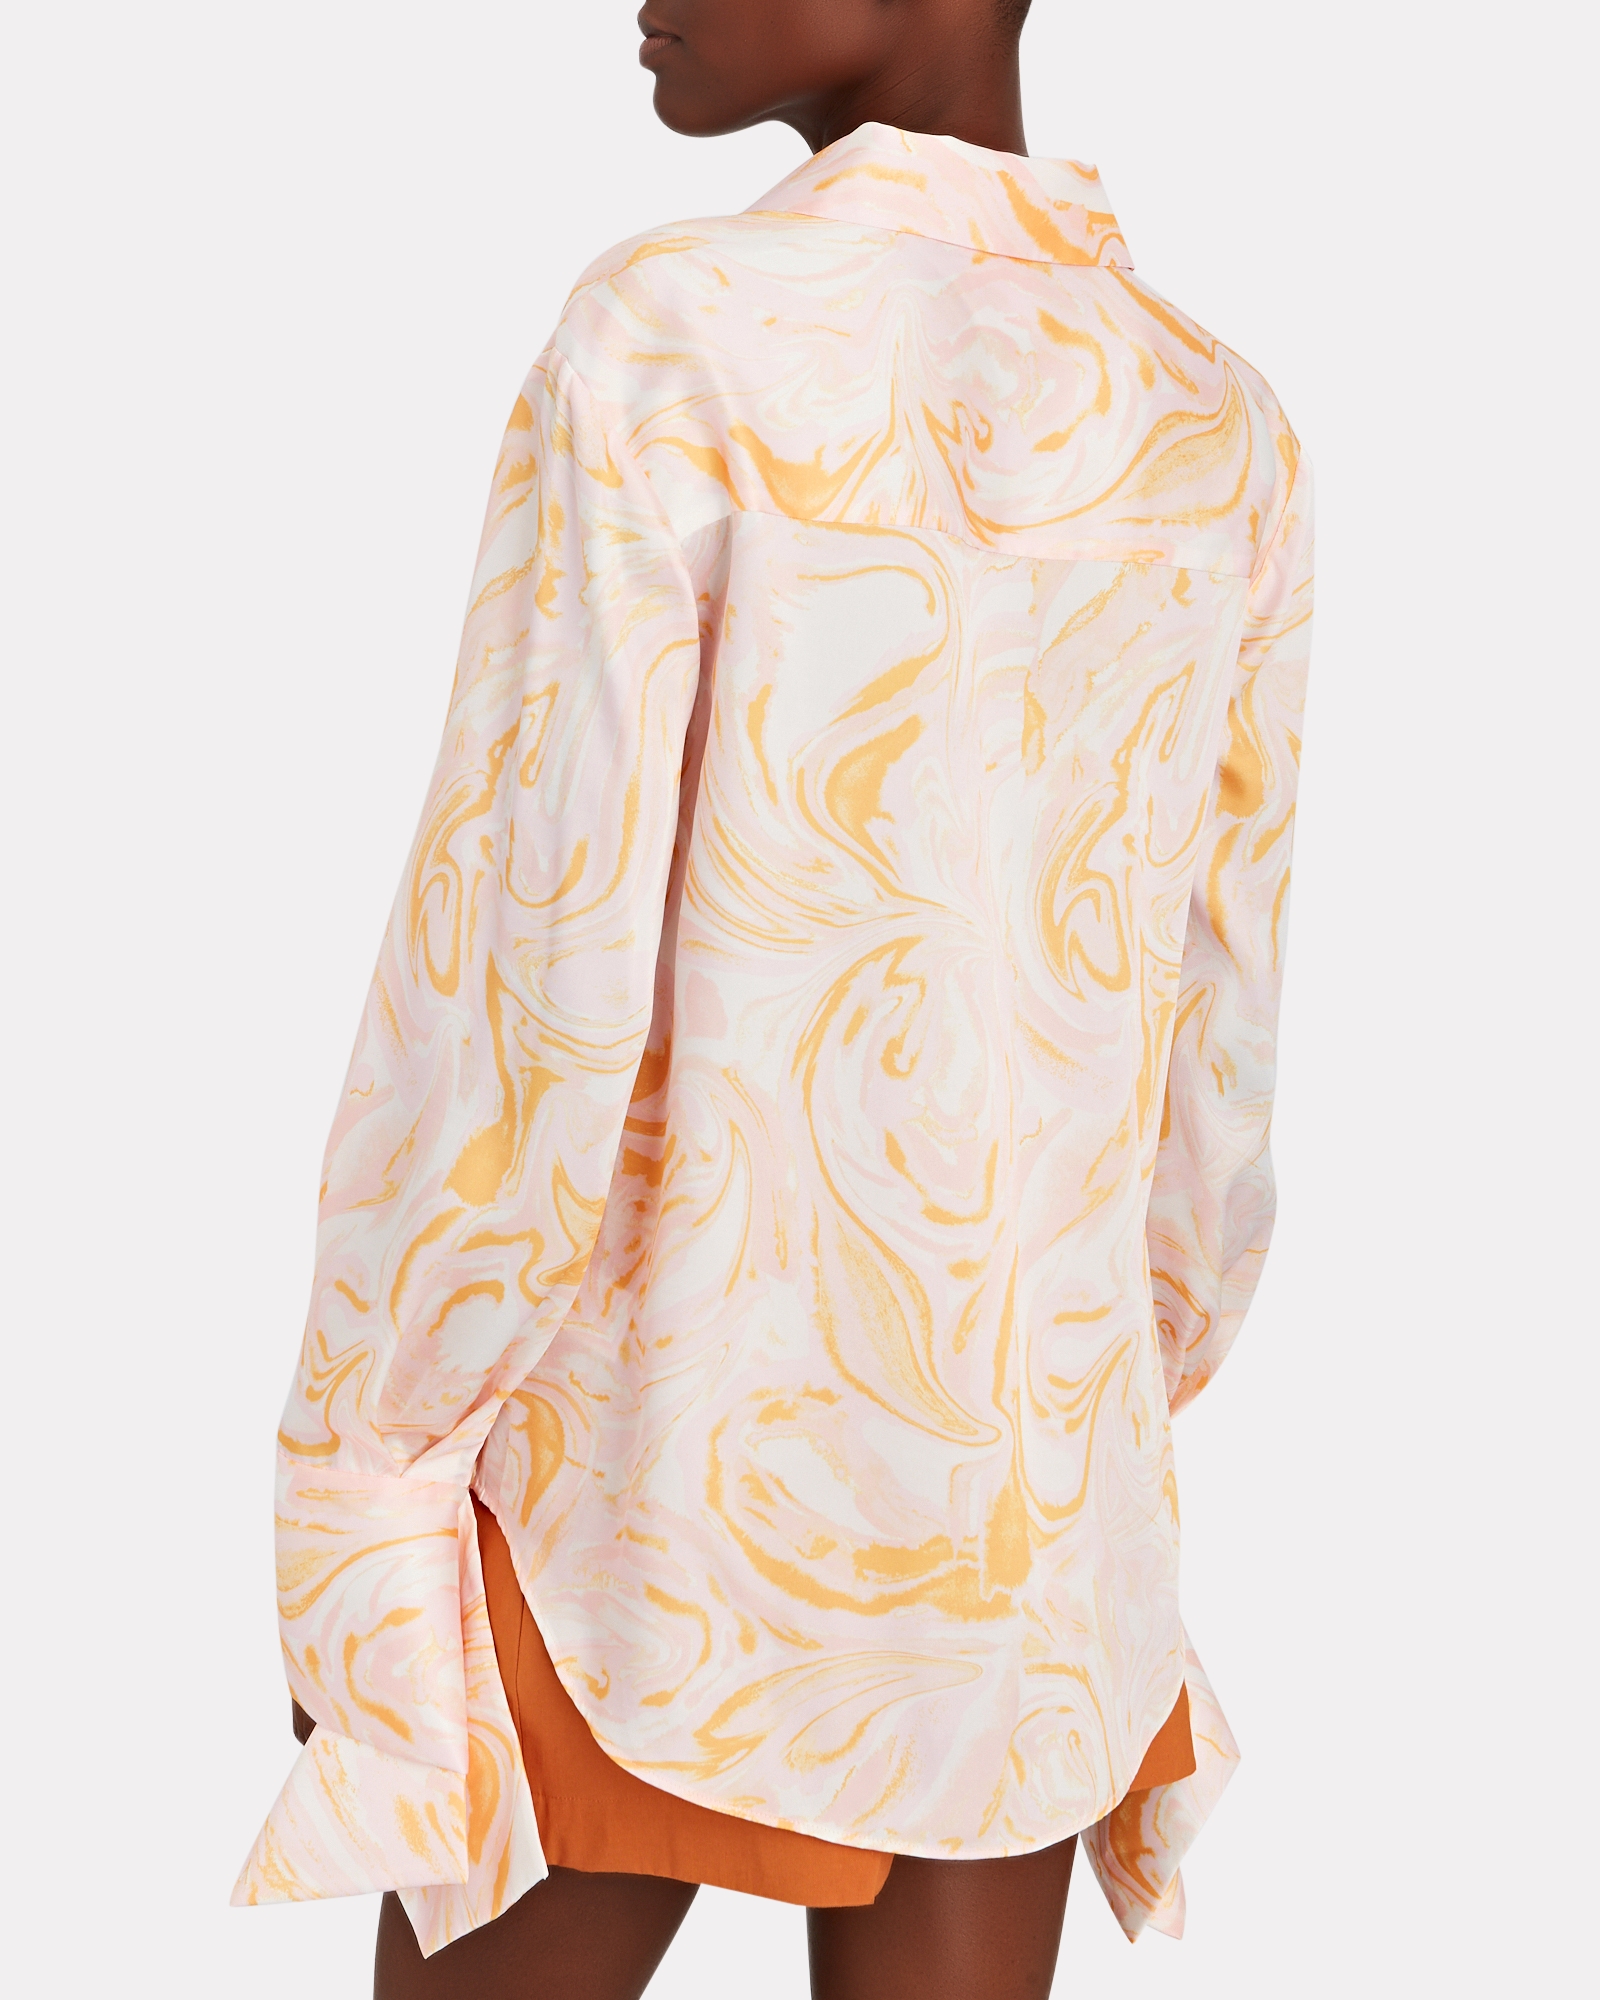 Acler Coleman Marble Satin Blouse | INTERMIX®